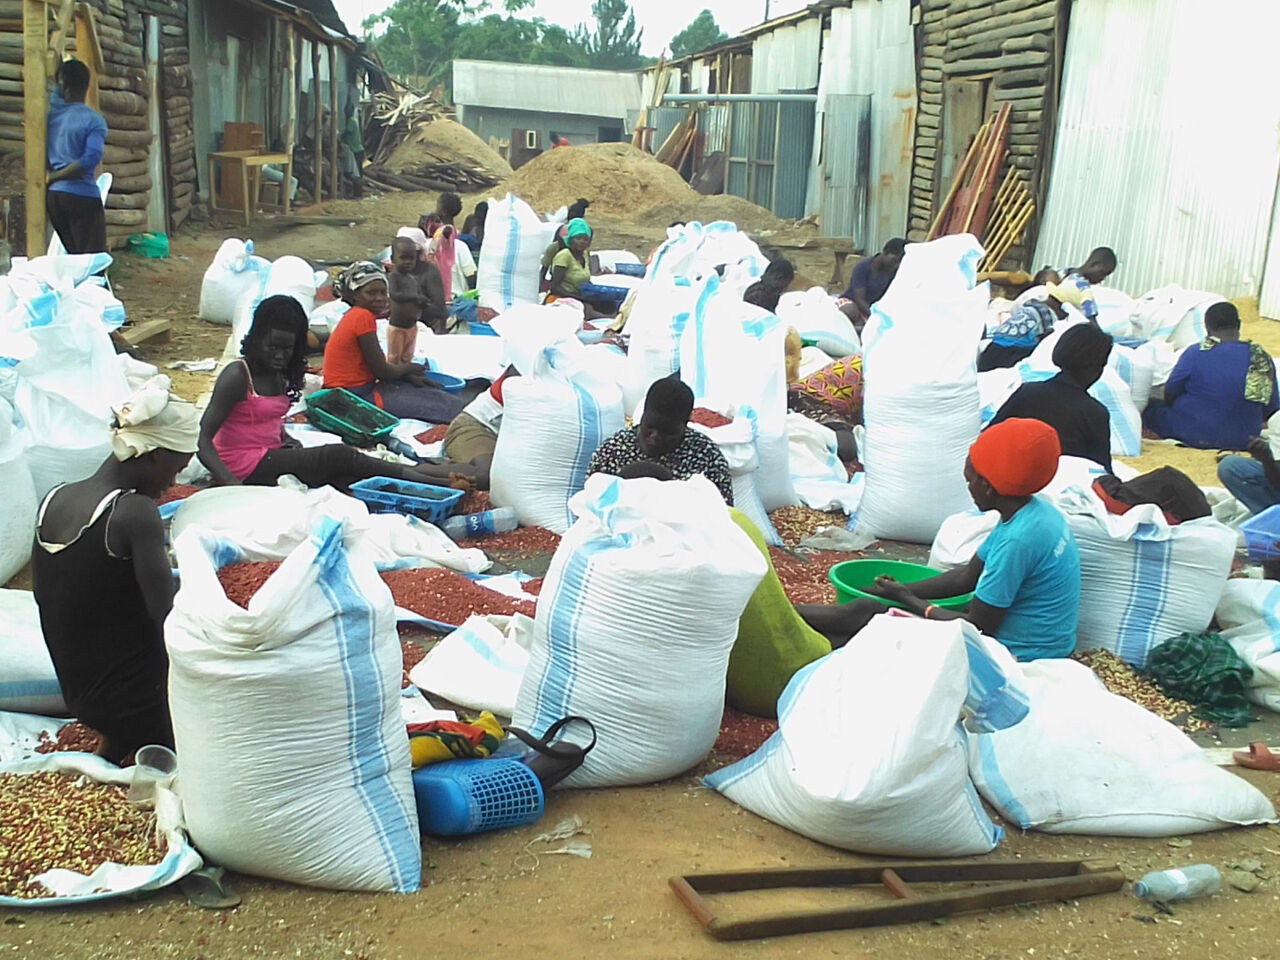 People sat on the ground surrounded by large bags of food, part of a project by Saben Foods from Uganda, whose project aims to provide effective and sustainable supply chains for small farmers.